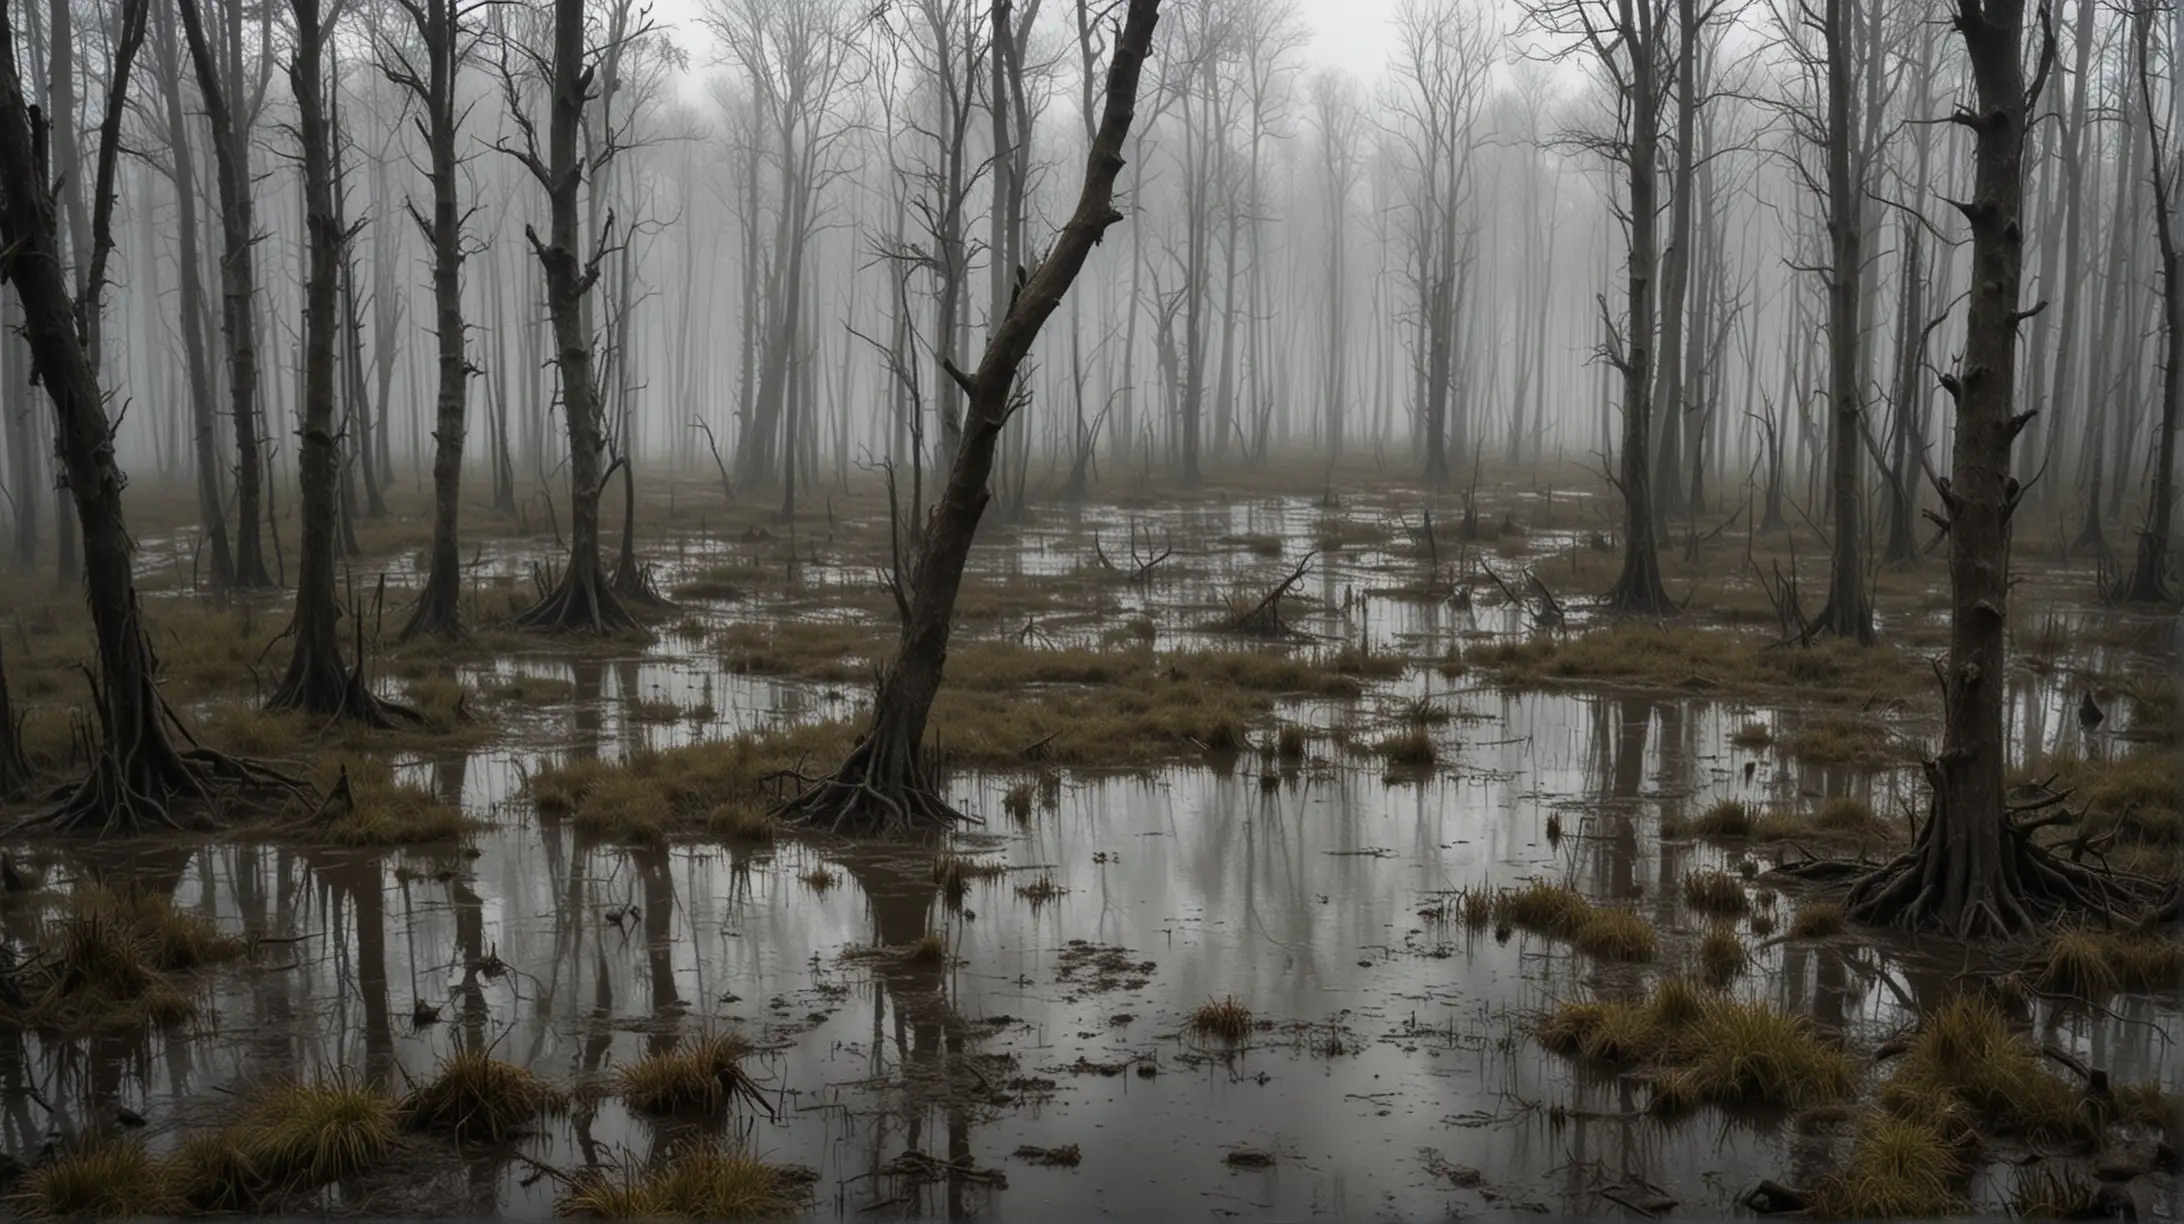 Misty Swamp Landscape in an Ancient Forest